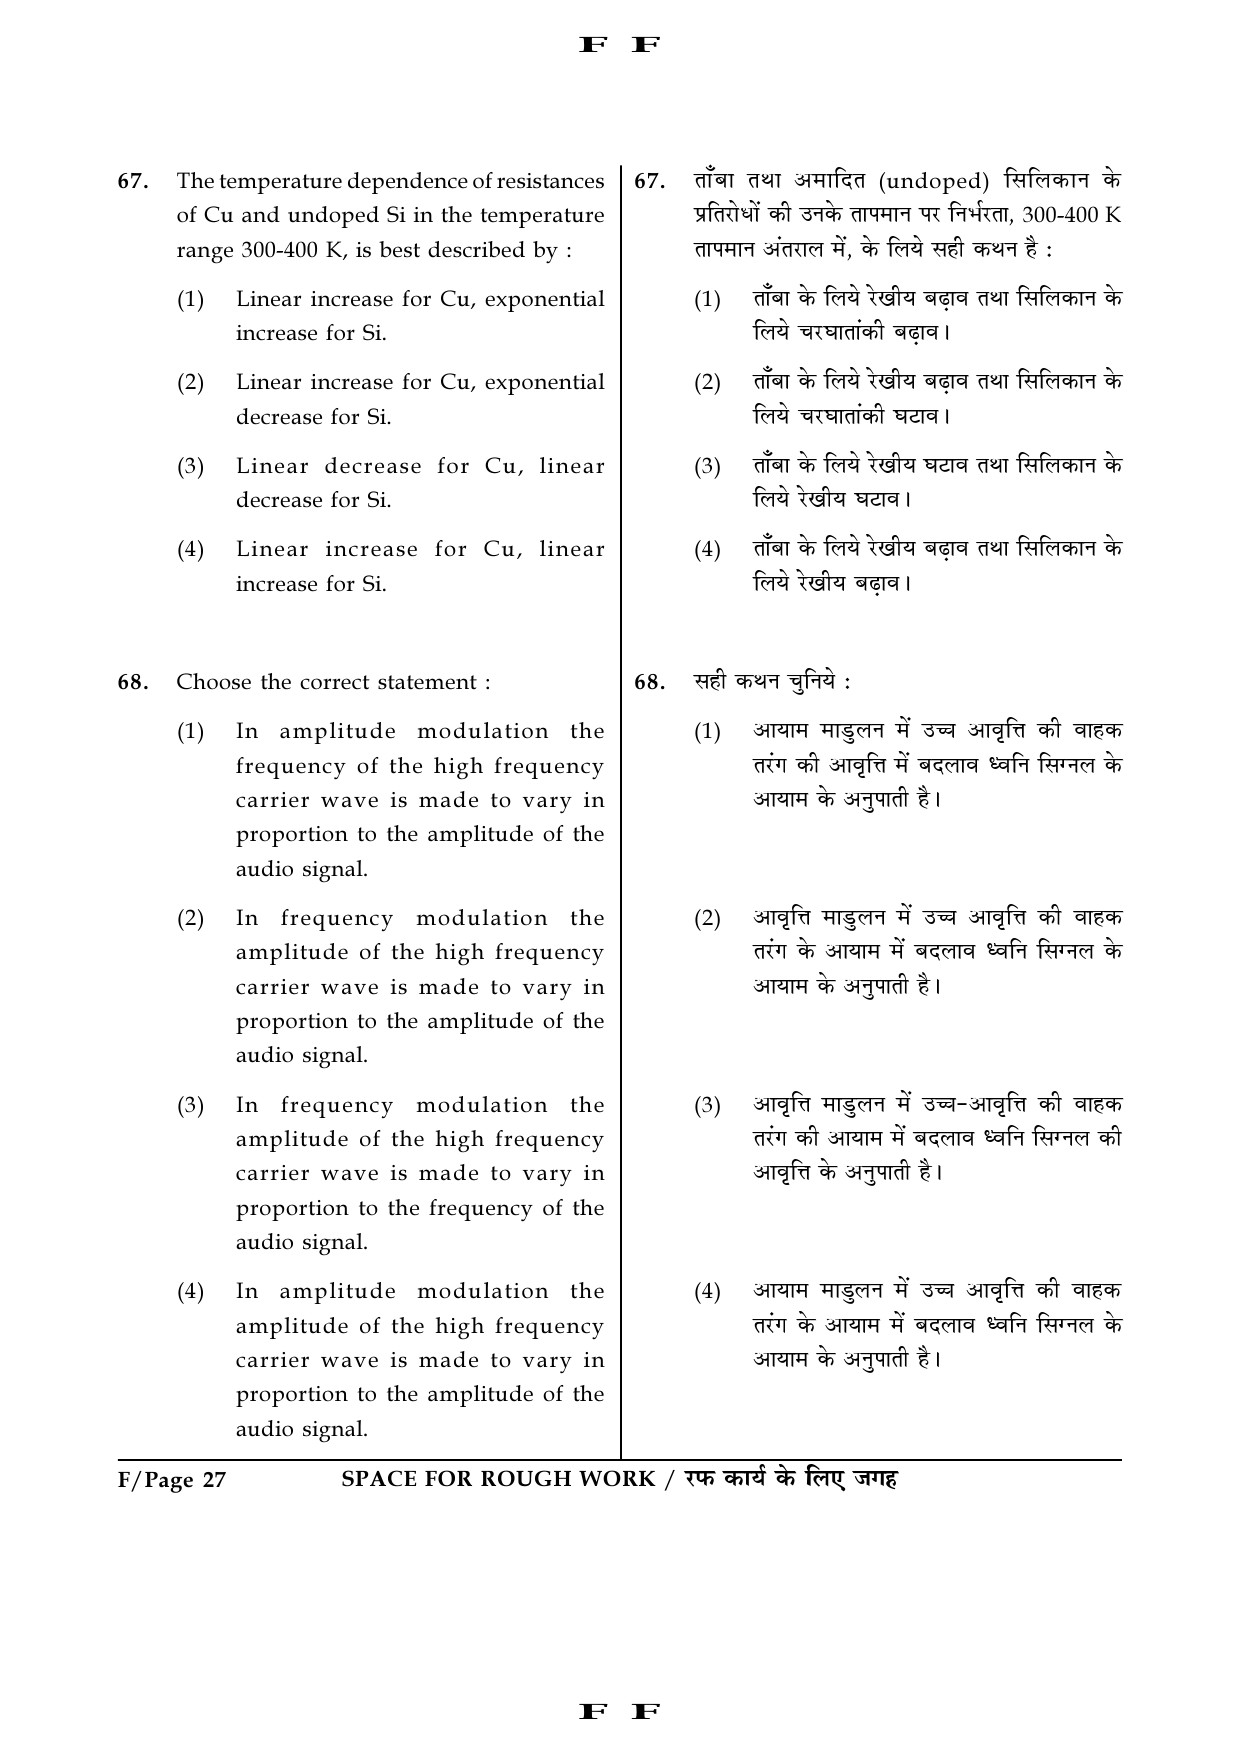 JEE Main Exam Question Paper 2016 Booklet F 27